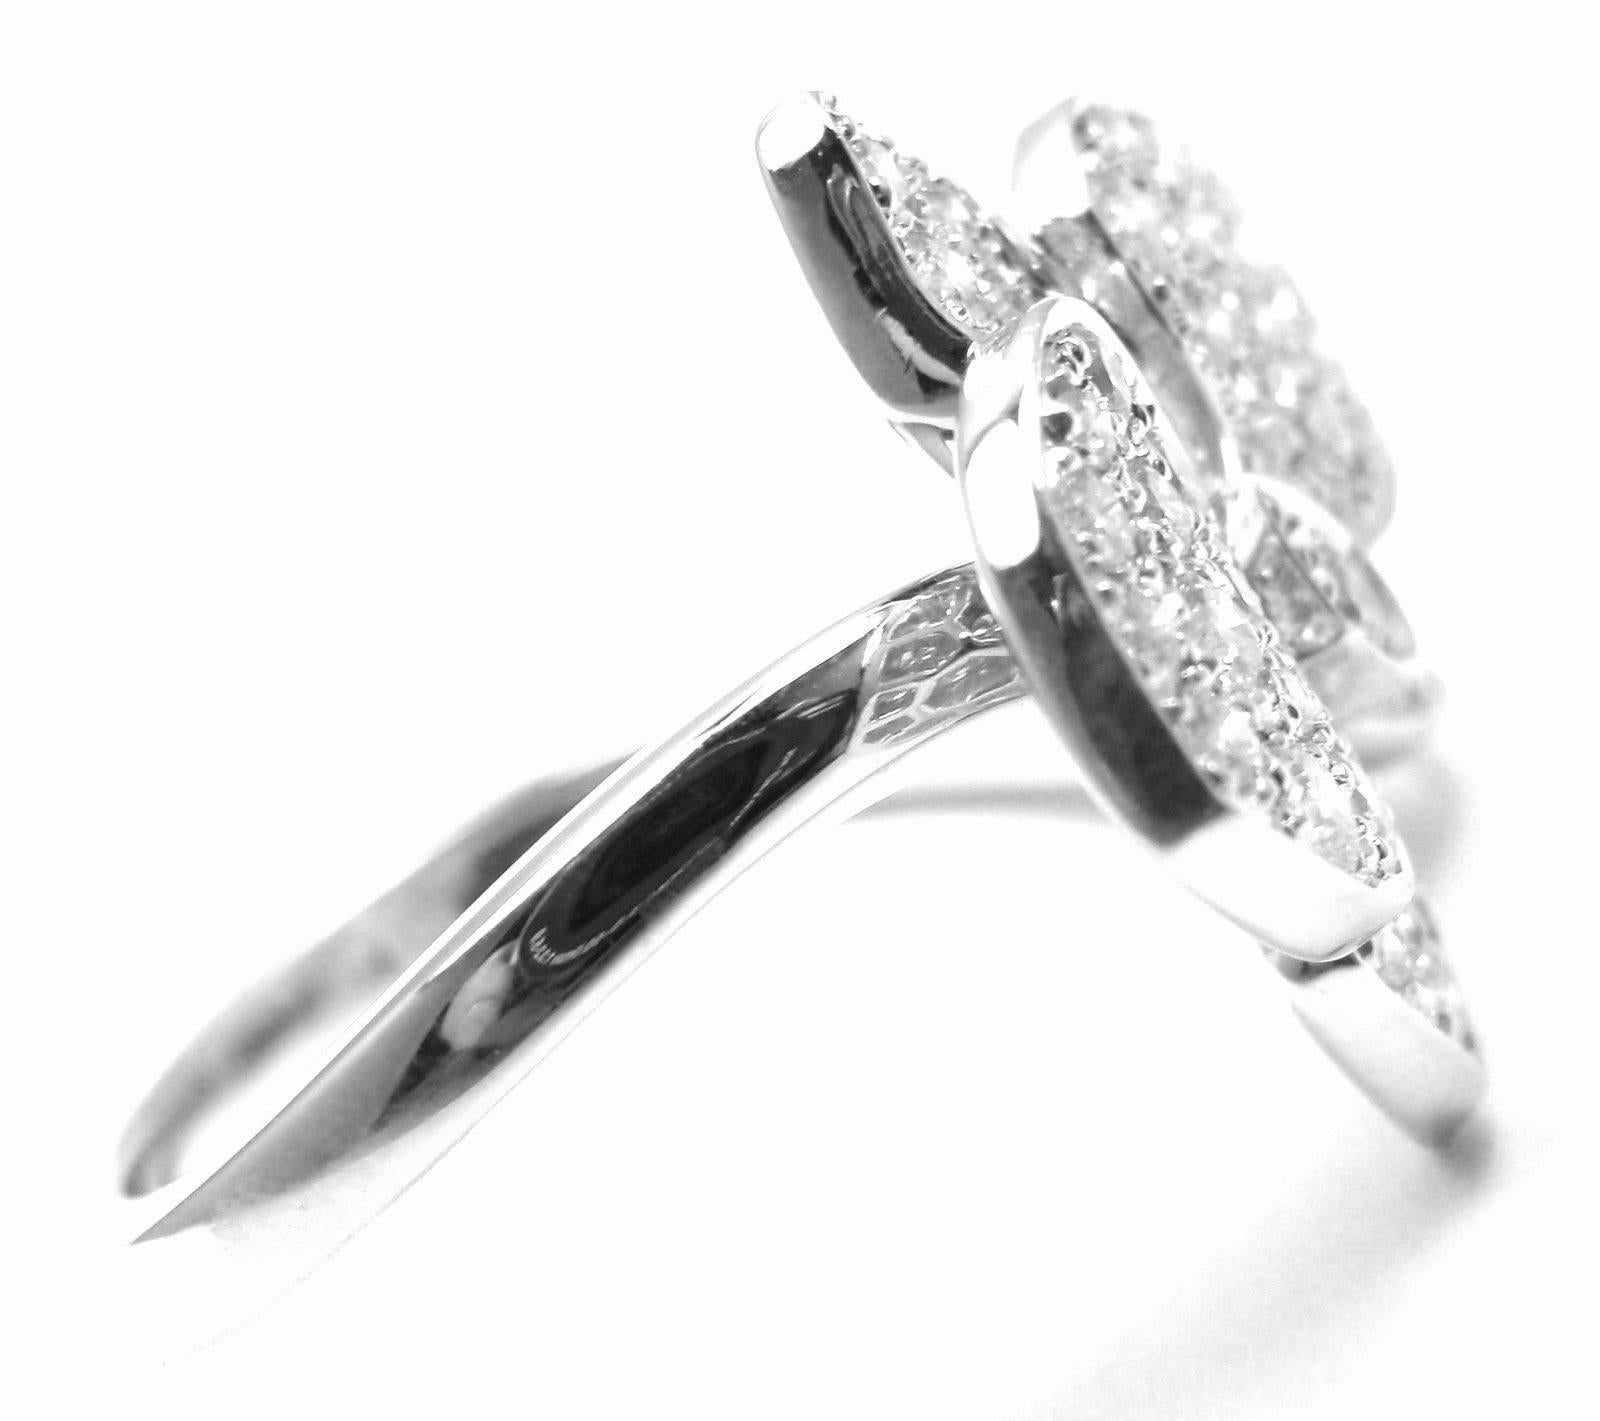 18k White Gold Caresse D'orchidées Orchid Flower Diamond Ring by Cartier.   
With 49 round brilliant cut diamonds VS1 clarity, E color total weight approx. .54ct
This ring comes with its original Cartier box.  
Details: 
Ring Size: European 52, US 6